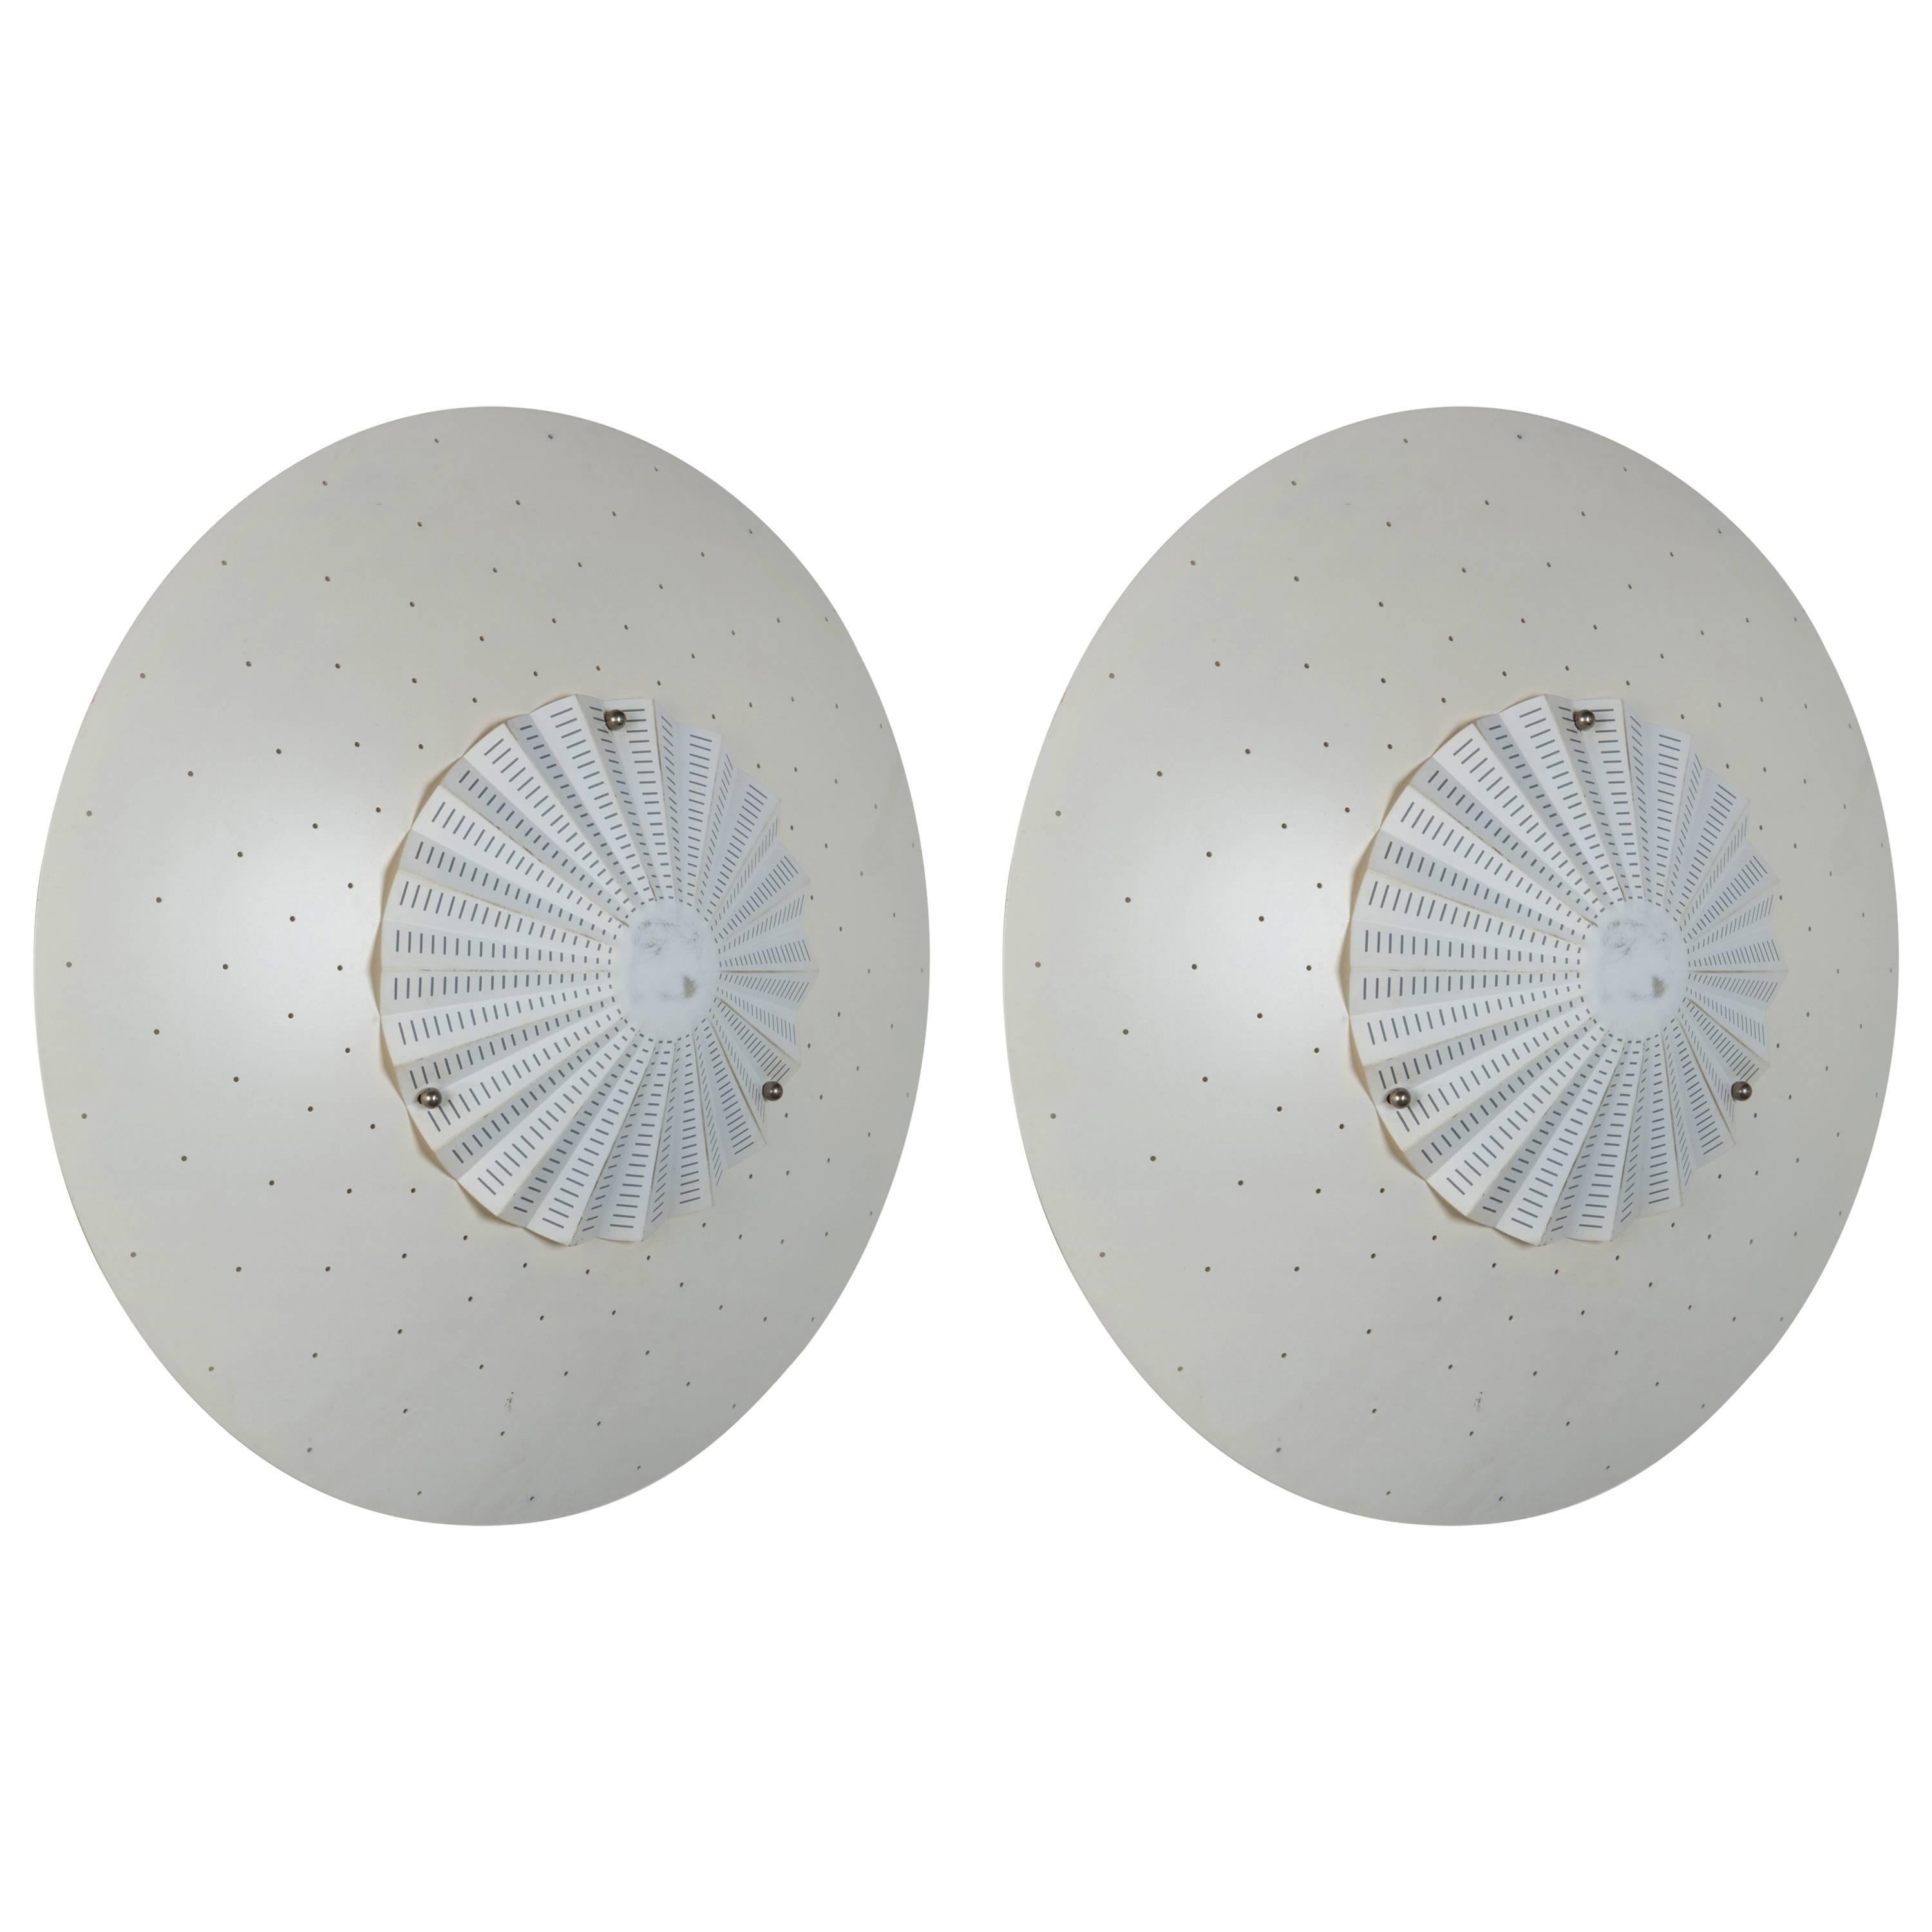 Pair of "Migale" Wall Lights by Oluce